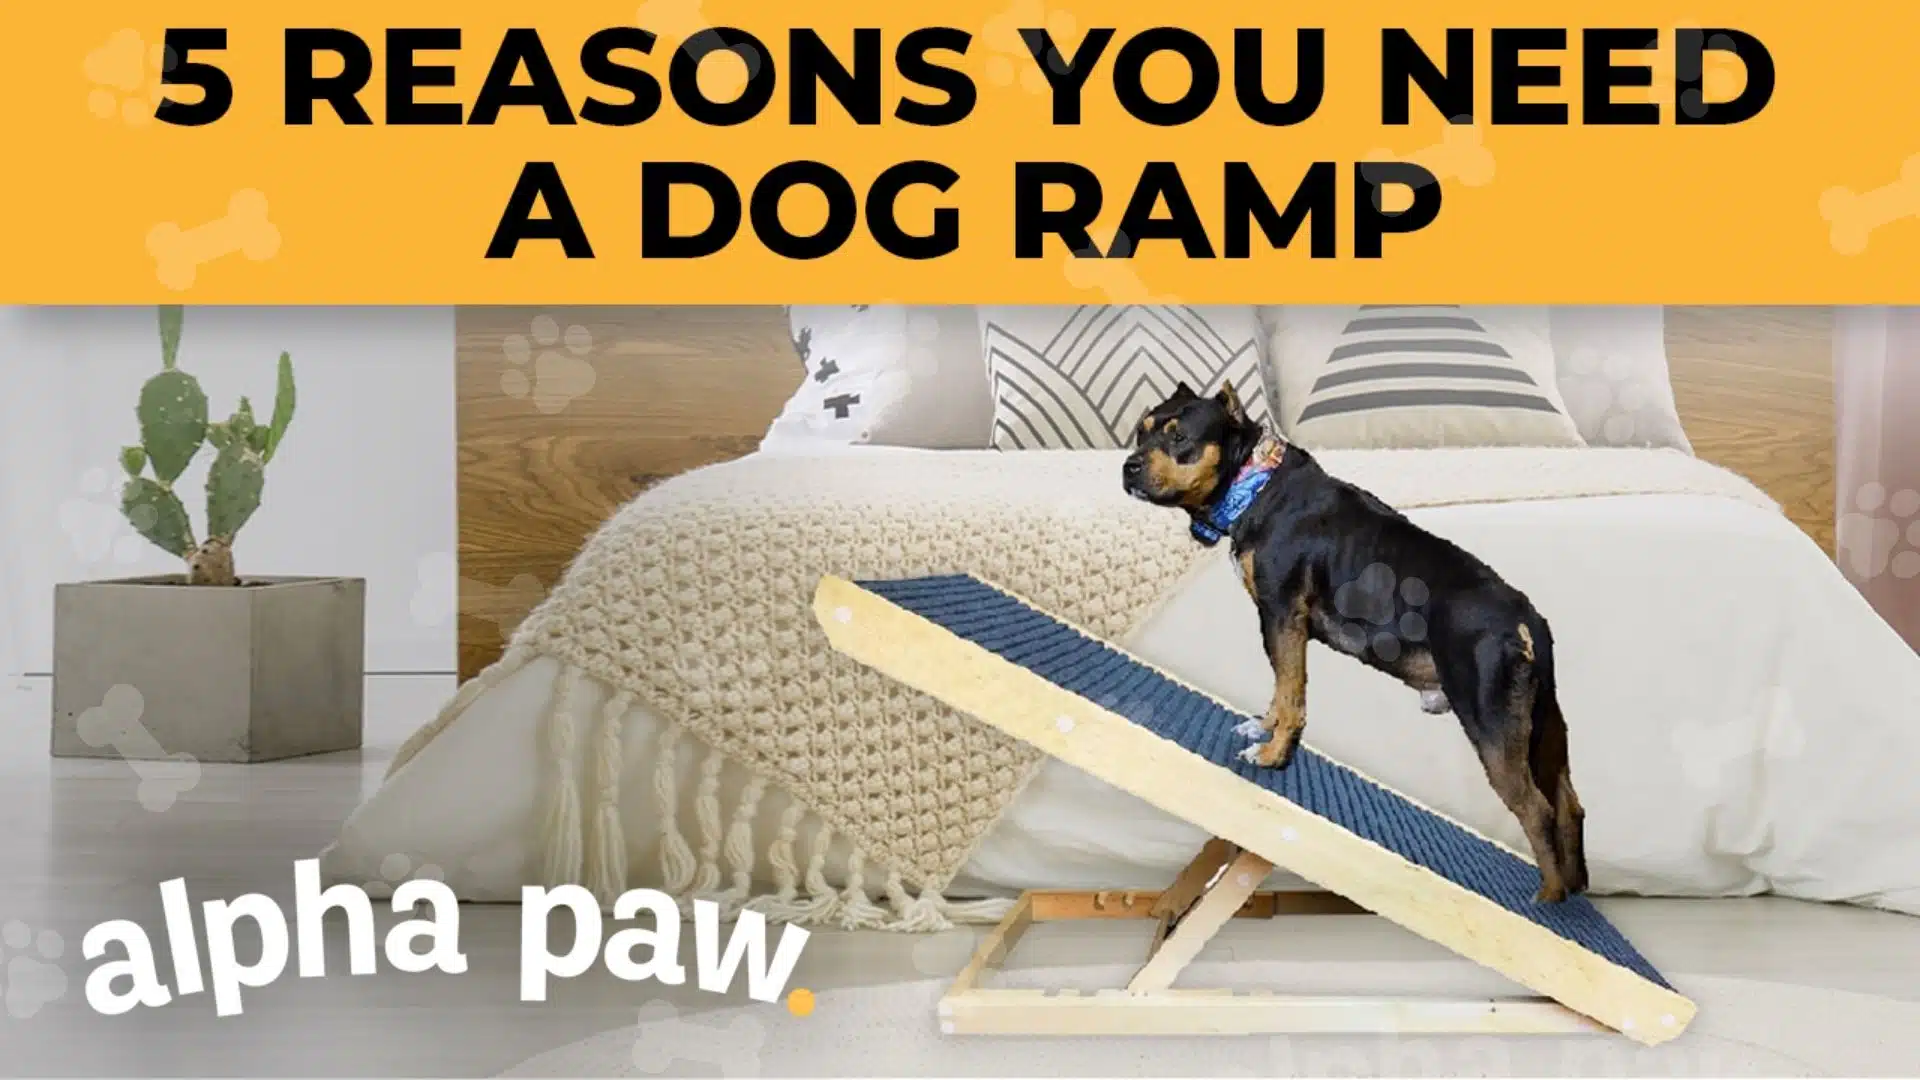 Video: 5 Reasons You Need A Dog Ramp